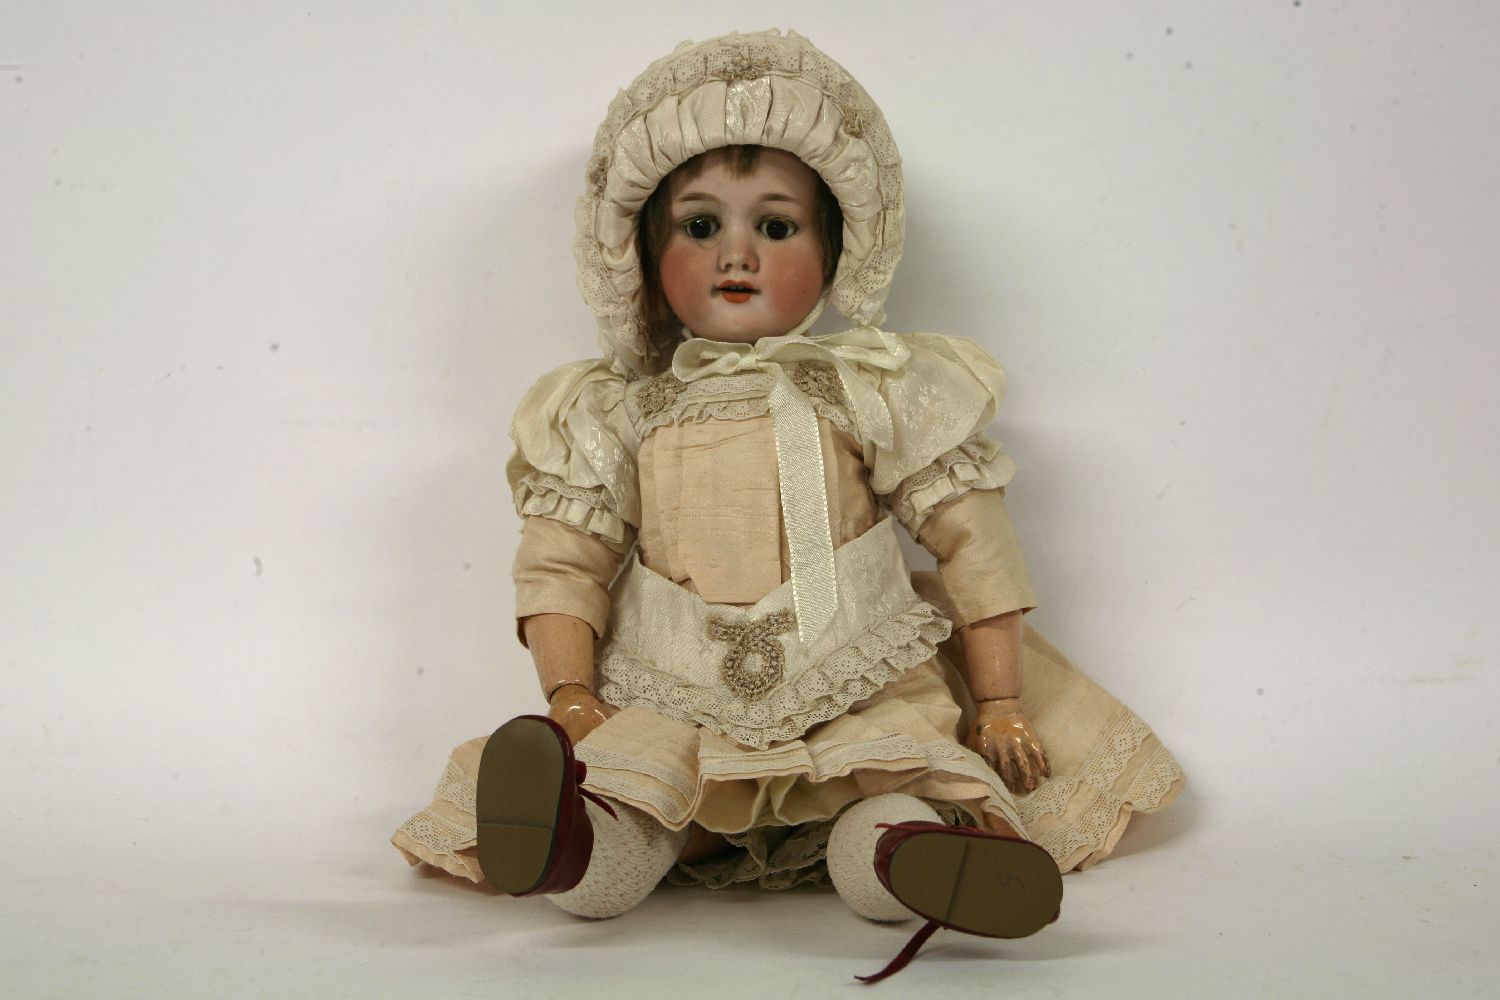 An Armand Marseille bisque head doll,with eyes/open/shut, mouth open, numbered 390 n. A.2.M,